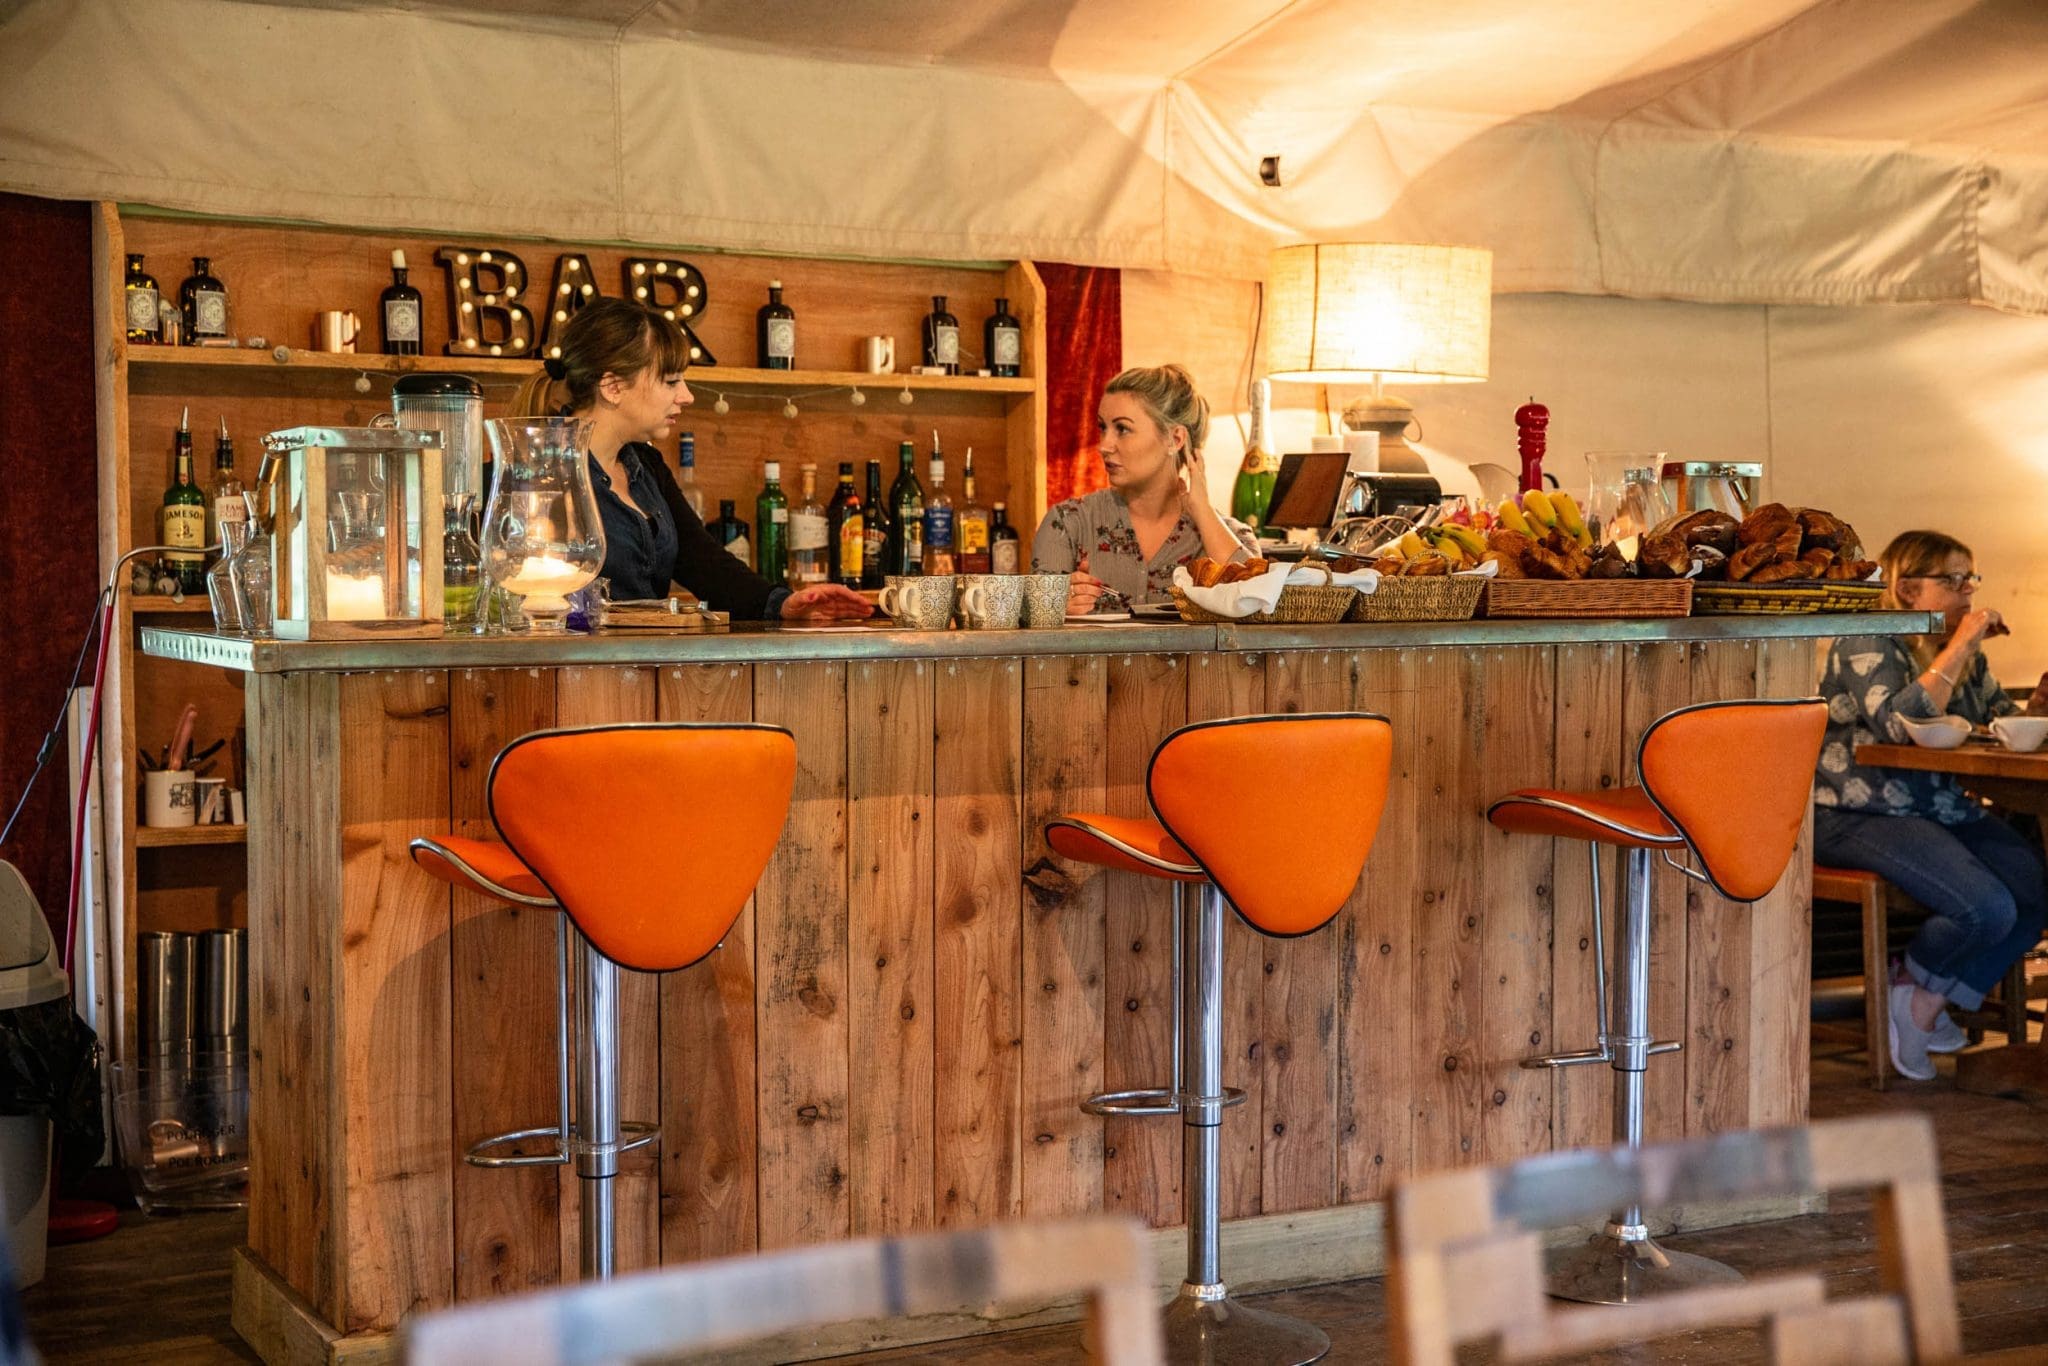 A wooden bar with orange bar stools in front of it